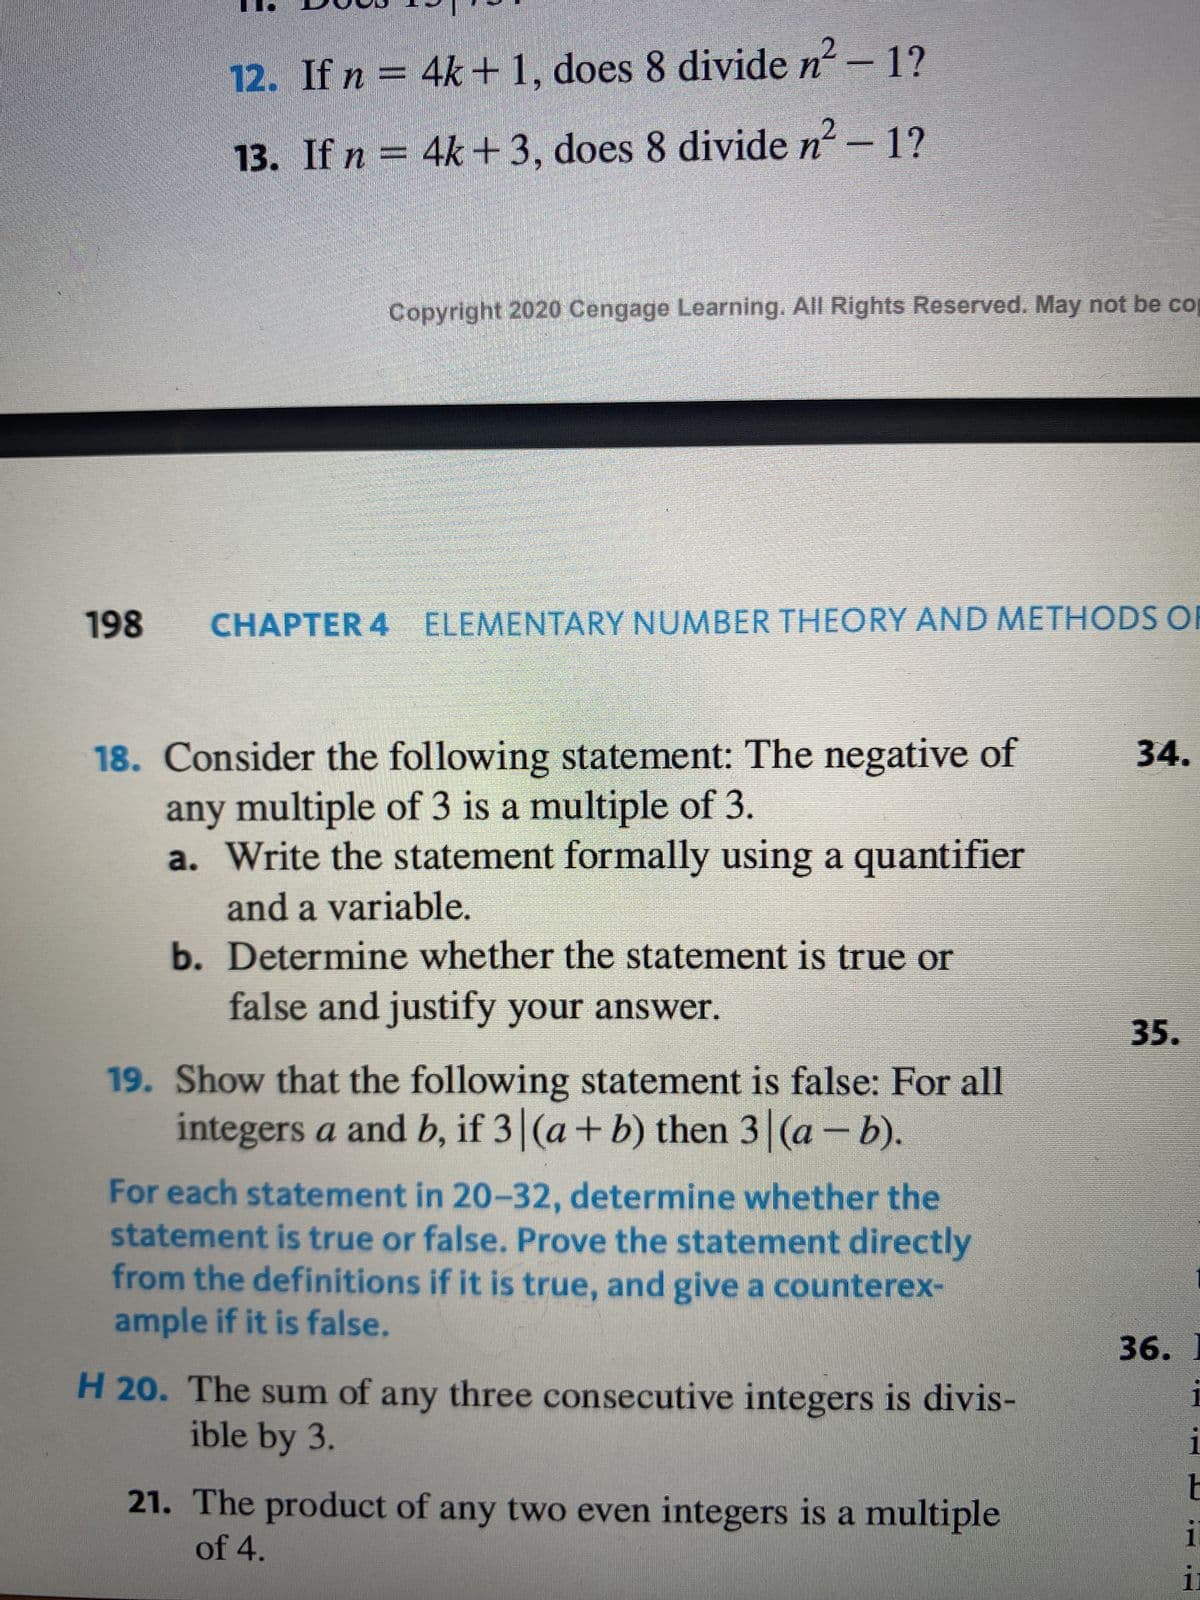 12. If n = 4k+ 1, does 8 divide n² - 1?
13. If n = 4k+ 3, does 8 divide n² - 1?
Copyright 2020 Cengage Learning. All Rights Reserved. May not be cop
198 CHAPTER 4 ELEMENTARY NUMBER THEORY AND METHODS OF
18. Consider the following statement: The negative of
any multiple of 3 is a multiple of 3.
a. Write the statement formally using a quantifier
and a variable.
b. Determine whether the statement is true or
false and justify your answer.
19. Show that the following statement is false: For all
integers a and b, if 3 (a + b) then 3 (a - b).
For each statement in 20-32, determine whether the
statement is true or false. Prove the statement directly
from the definitions if it is true, and give a counterex-
ample if it is false.
H 20. The sum of any three consecutive integers is divis-
ible by 3.
21. The product of any two even integers is a multiple
of 4.
34.
35.
1
36. I
i
1
E
i
ii